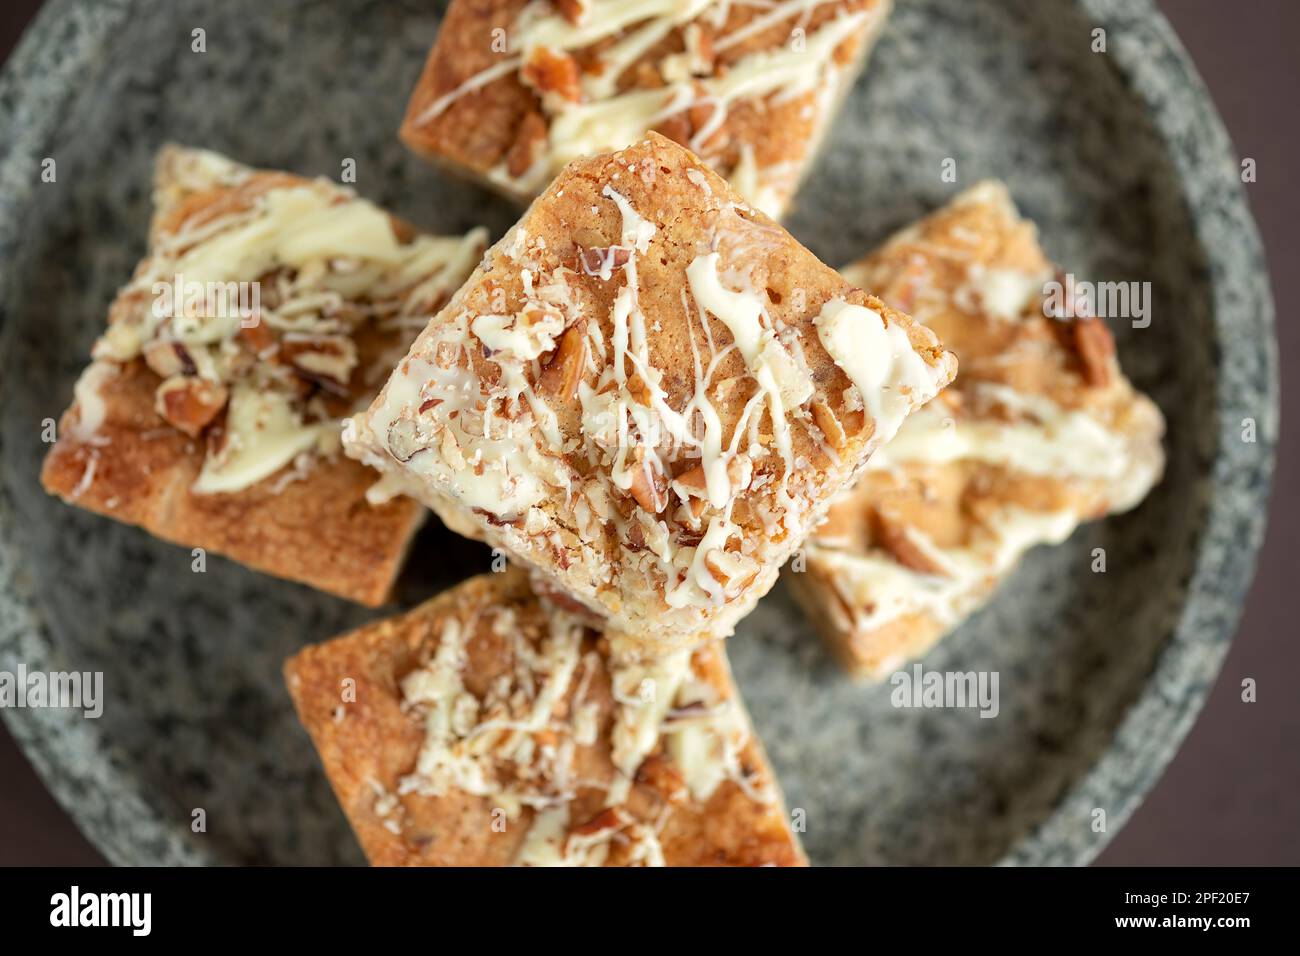 A overhead view of home baked white chocolate pecan Blondies arranged on a marbled plate. The blondies are still warm and gooey. an indulgent treat Stock Photo